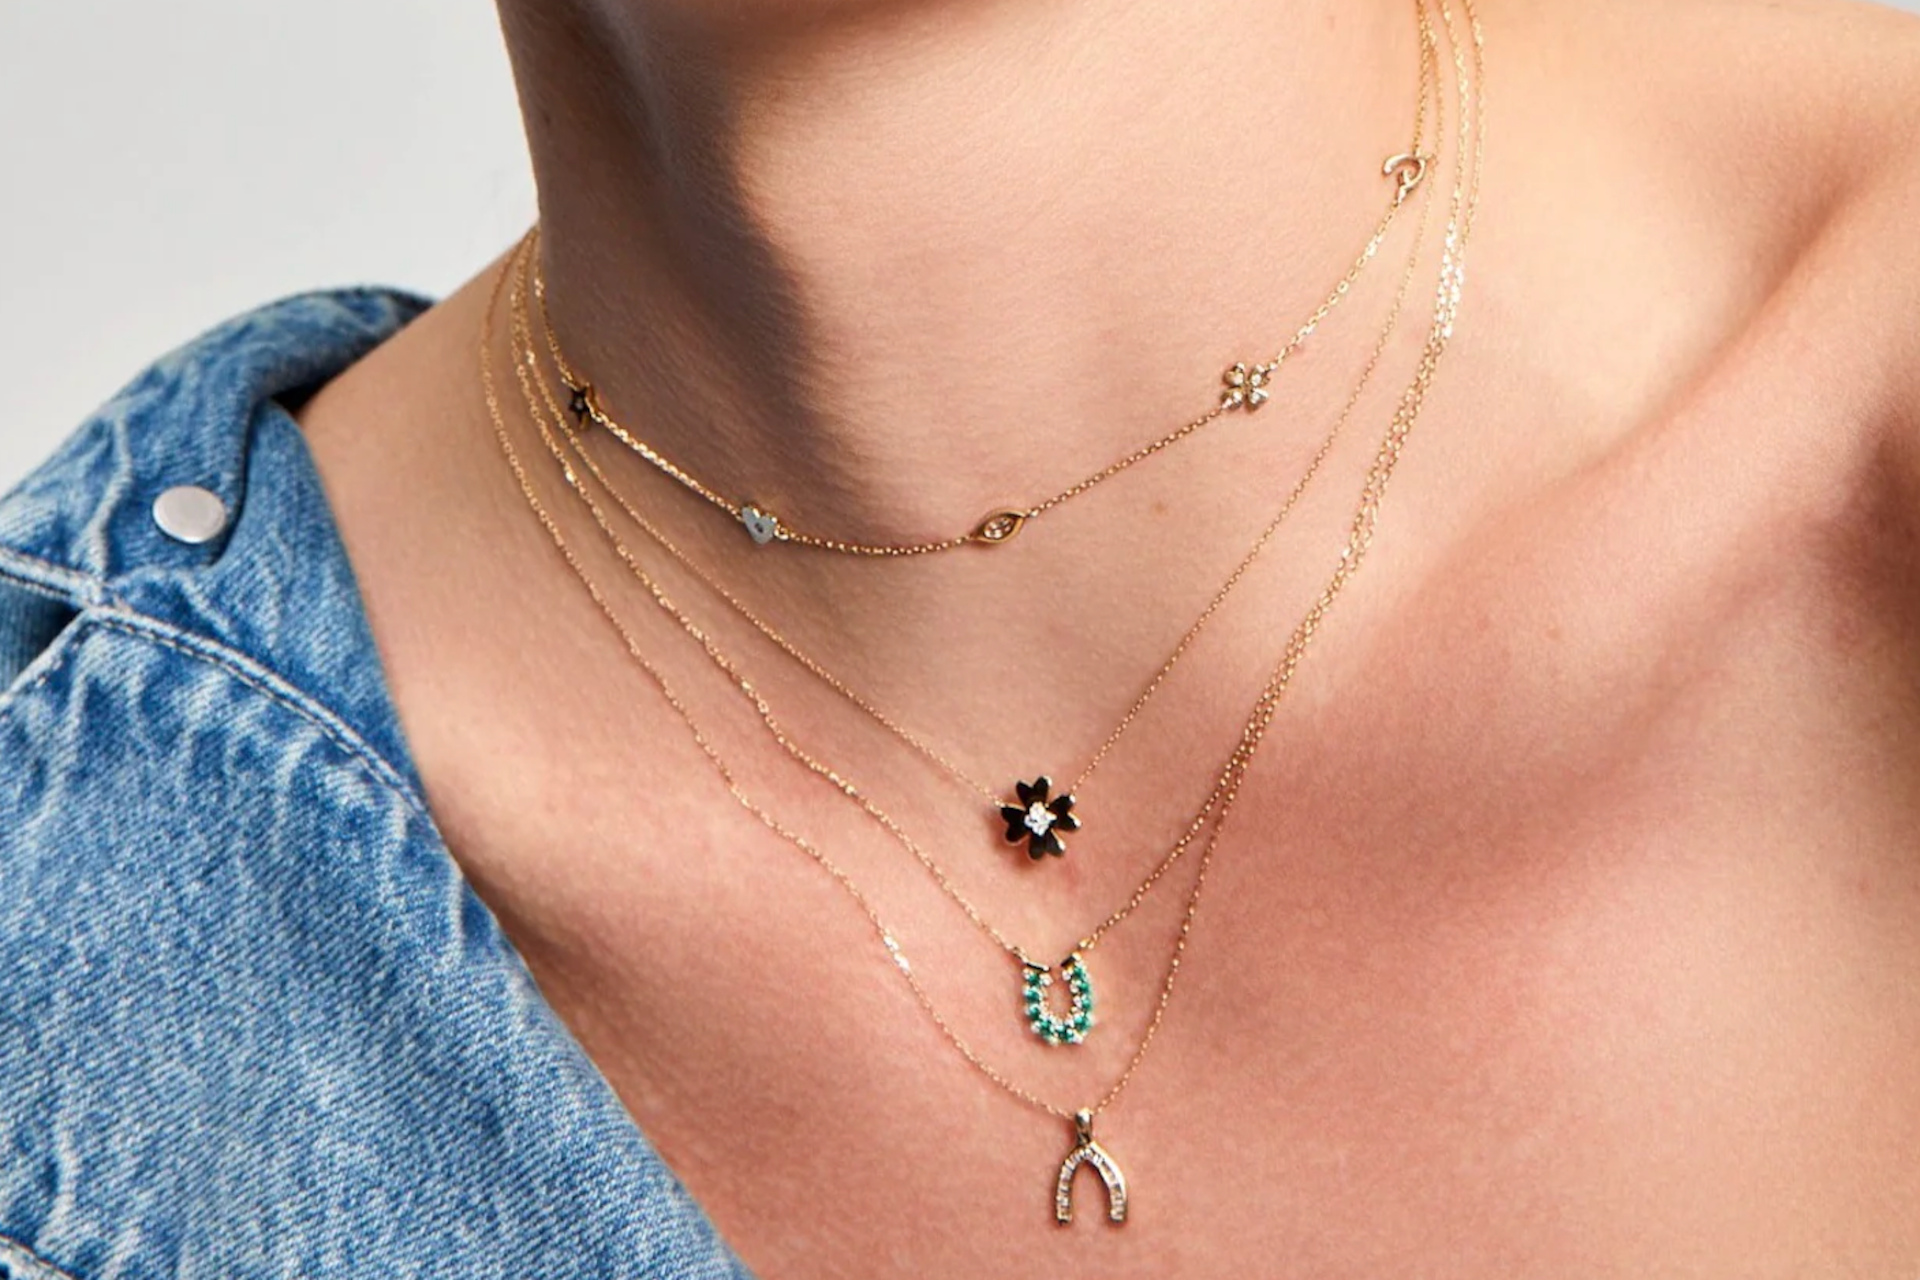 Close up of neck wearing necklaces